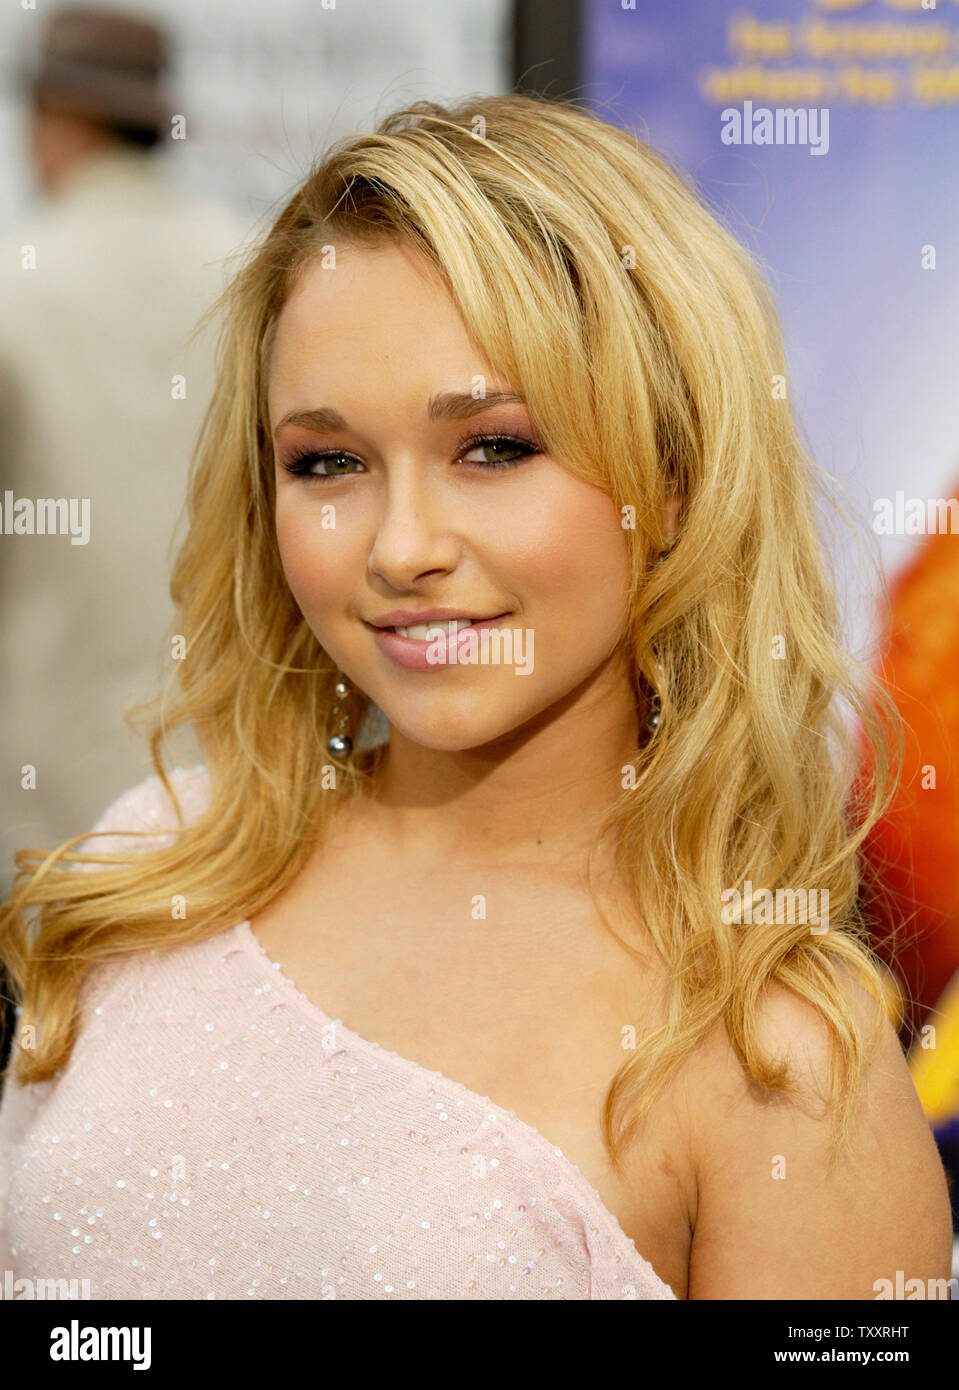 Actress Hayden Panettiere arrives at the January 8, 2005 Los Angeles premiere of the film, ' Racing Stripes', at Grauman's Chinese Theatre. The film opens in the US on January 14. (UPI Photo/Francis Specker) Stock Photo